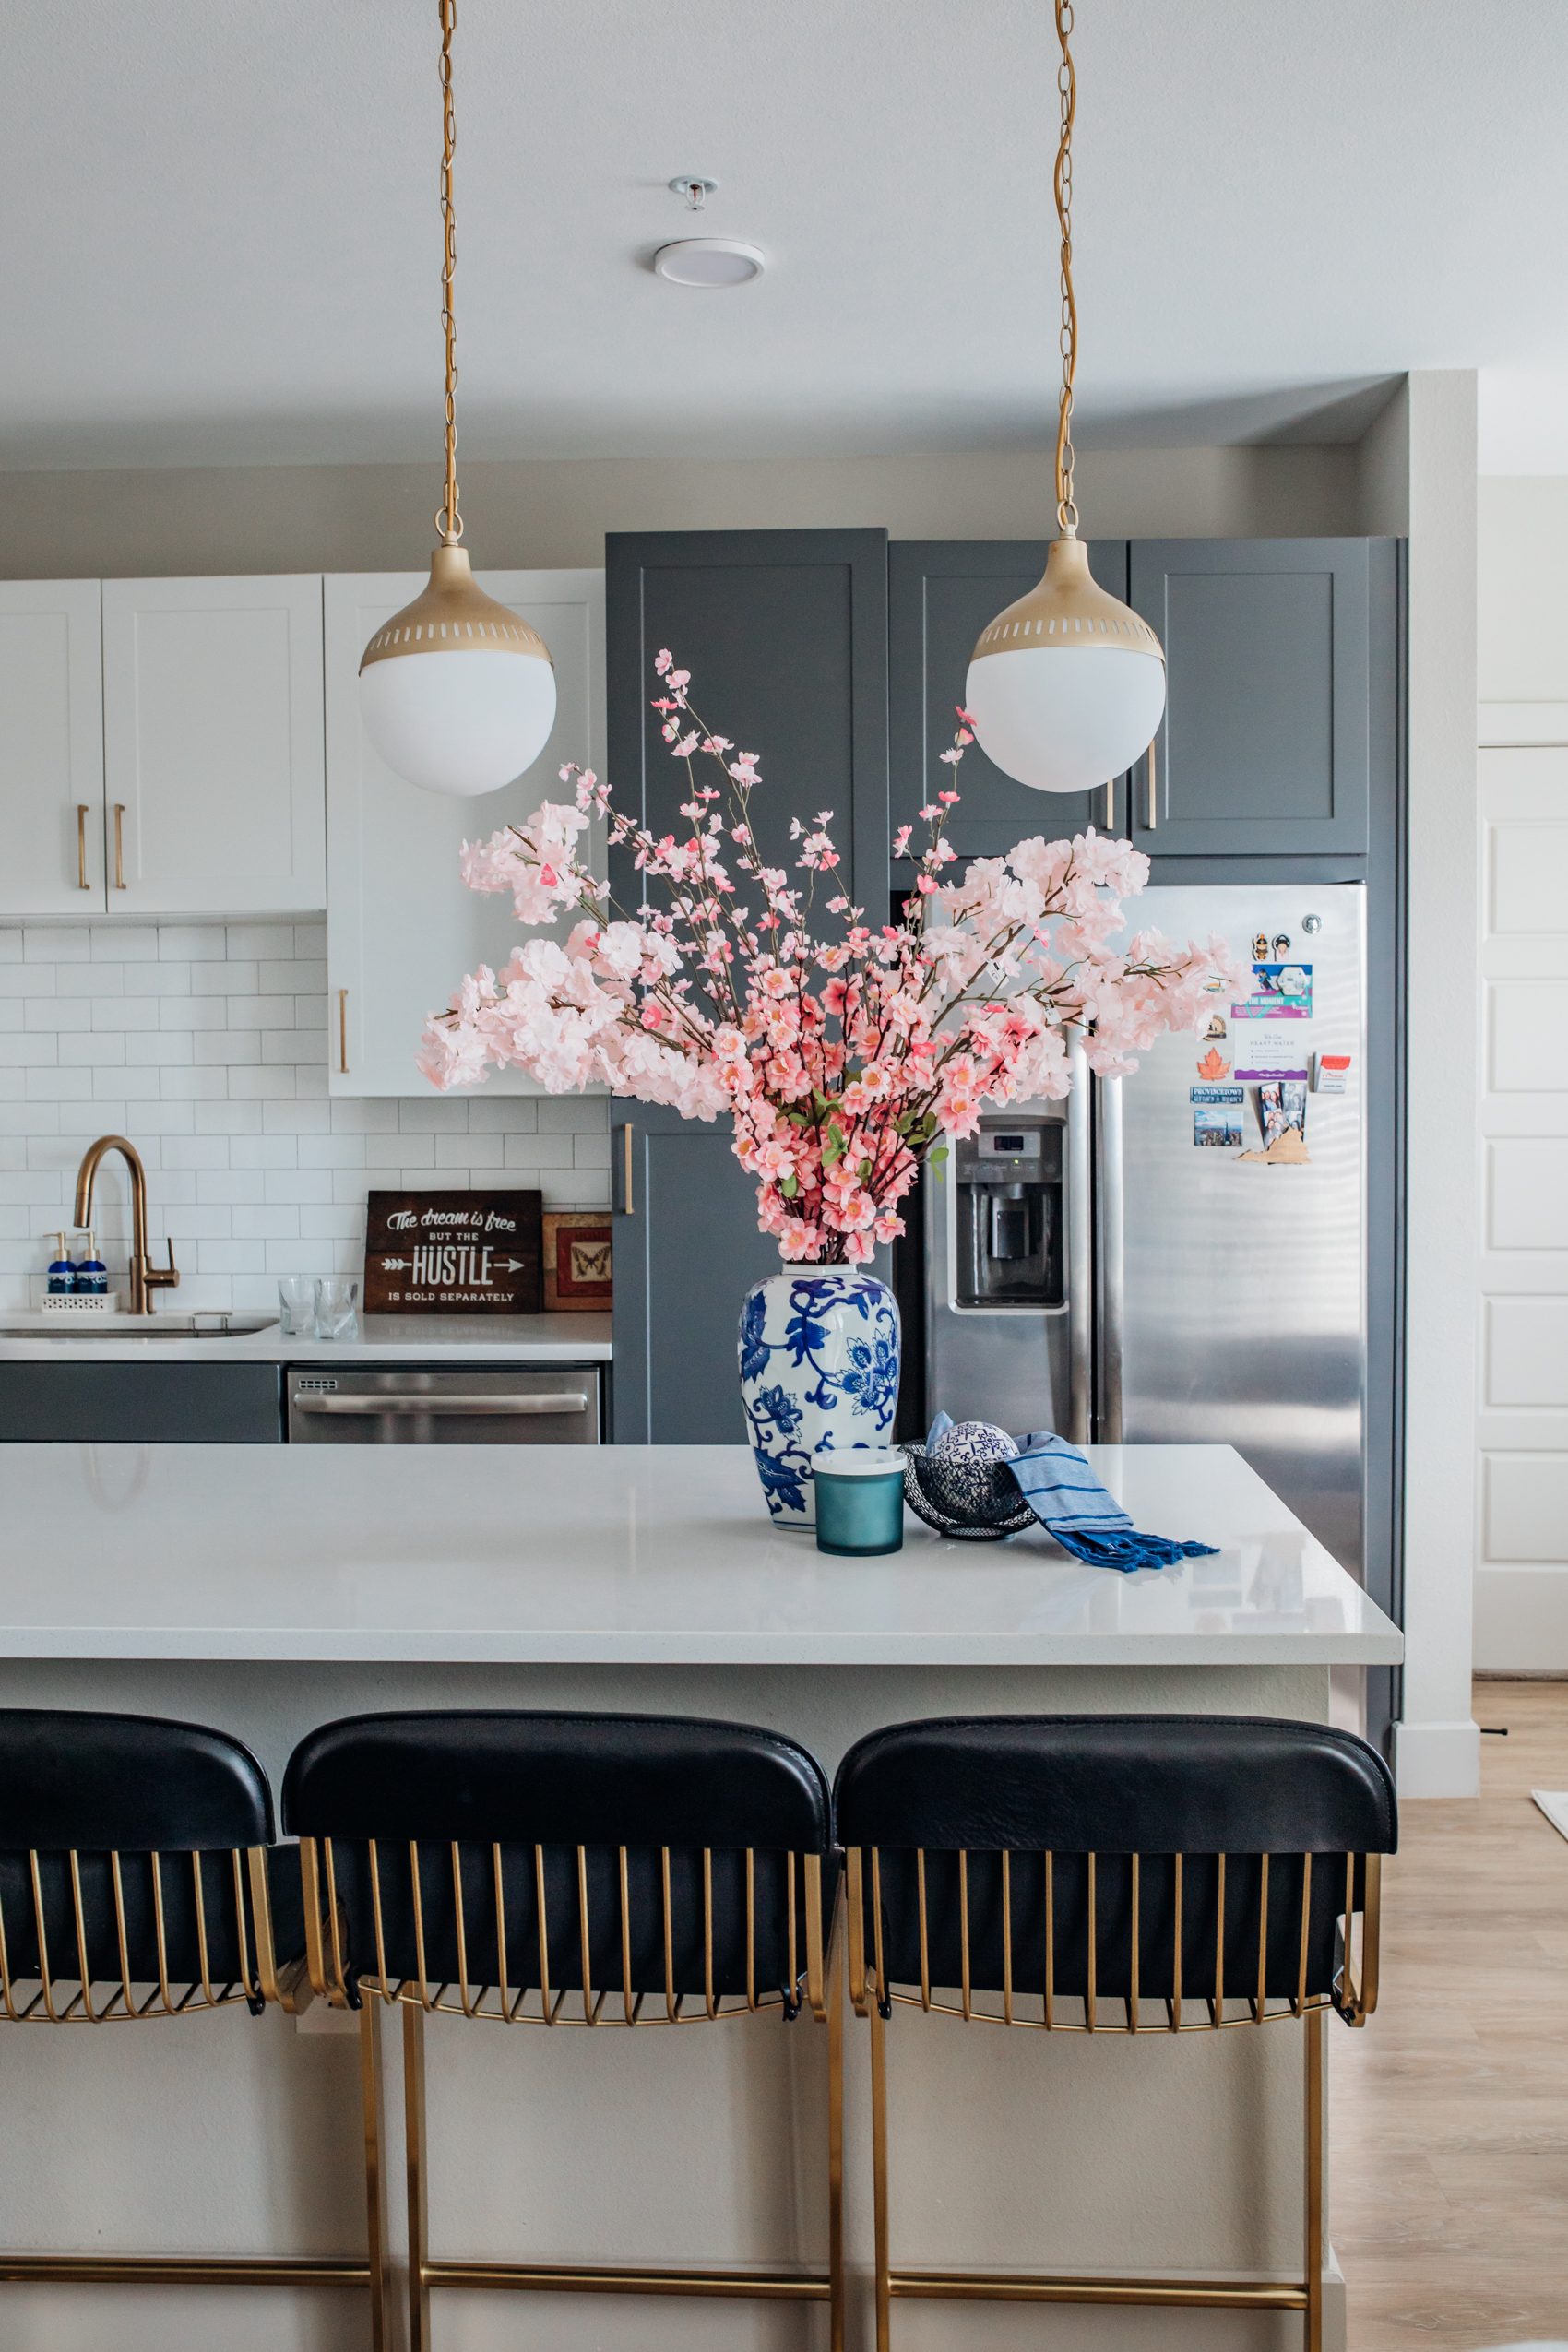 Two-toned kitchen with cherry blossoms, ginger gar, black leather barstools with gold legs, gold pendants and a gold sink faucet with subway tile